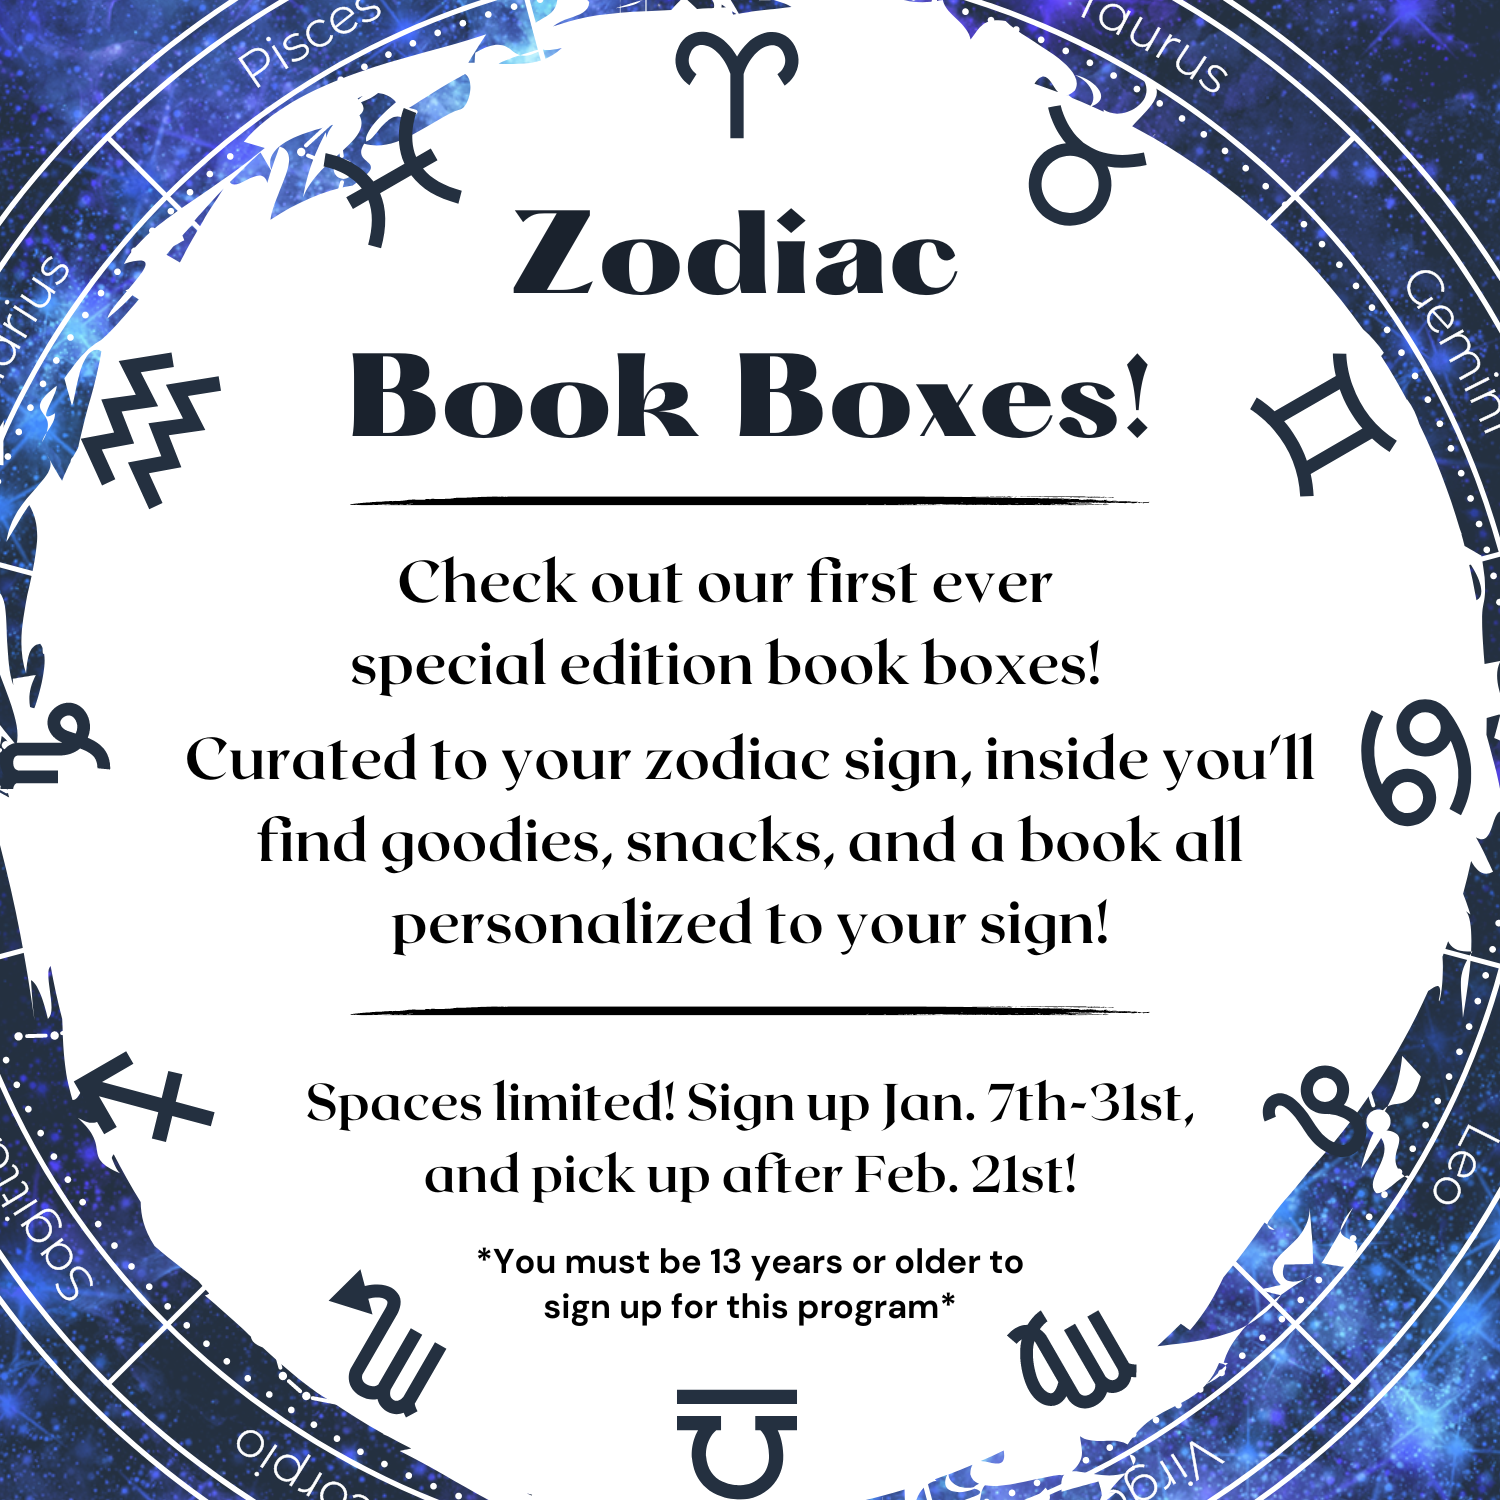 "Check out our special edition Book Box: Zodiacs! This special edition box will contain a library book and box full of items chosen specifically for your zodiac sign including snacks, stickers, and other fun giveaways!"